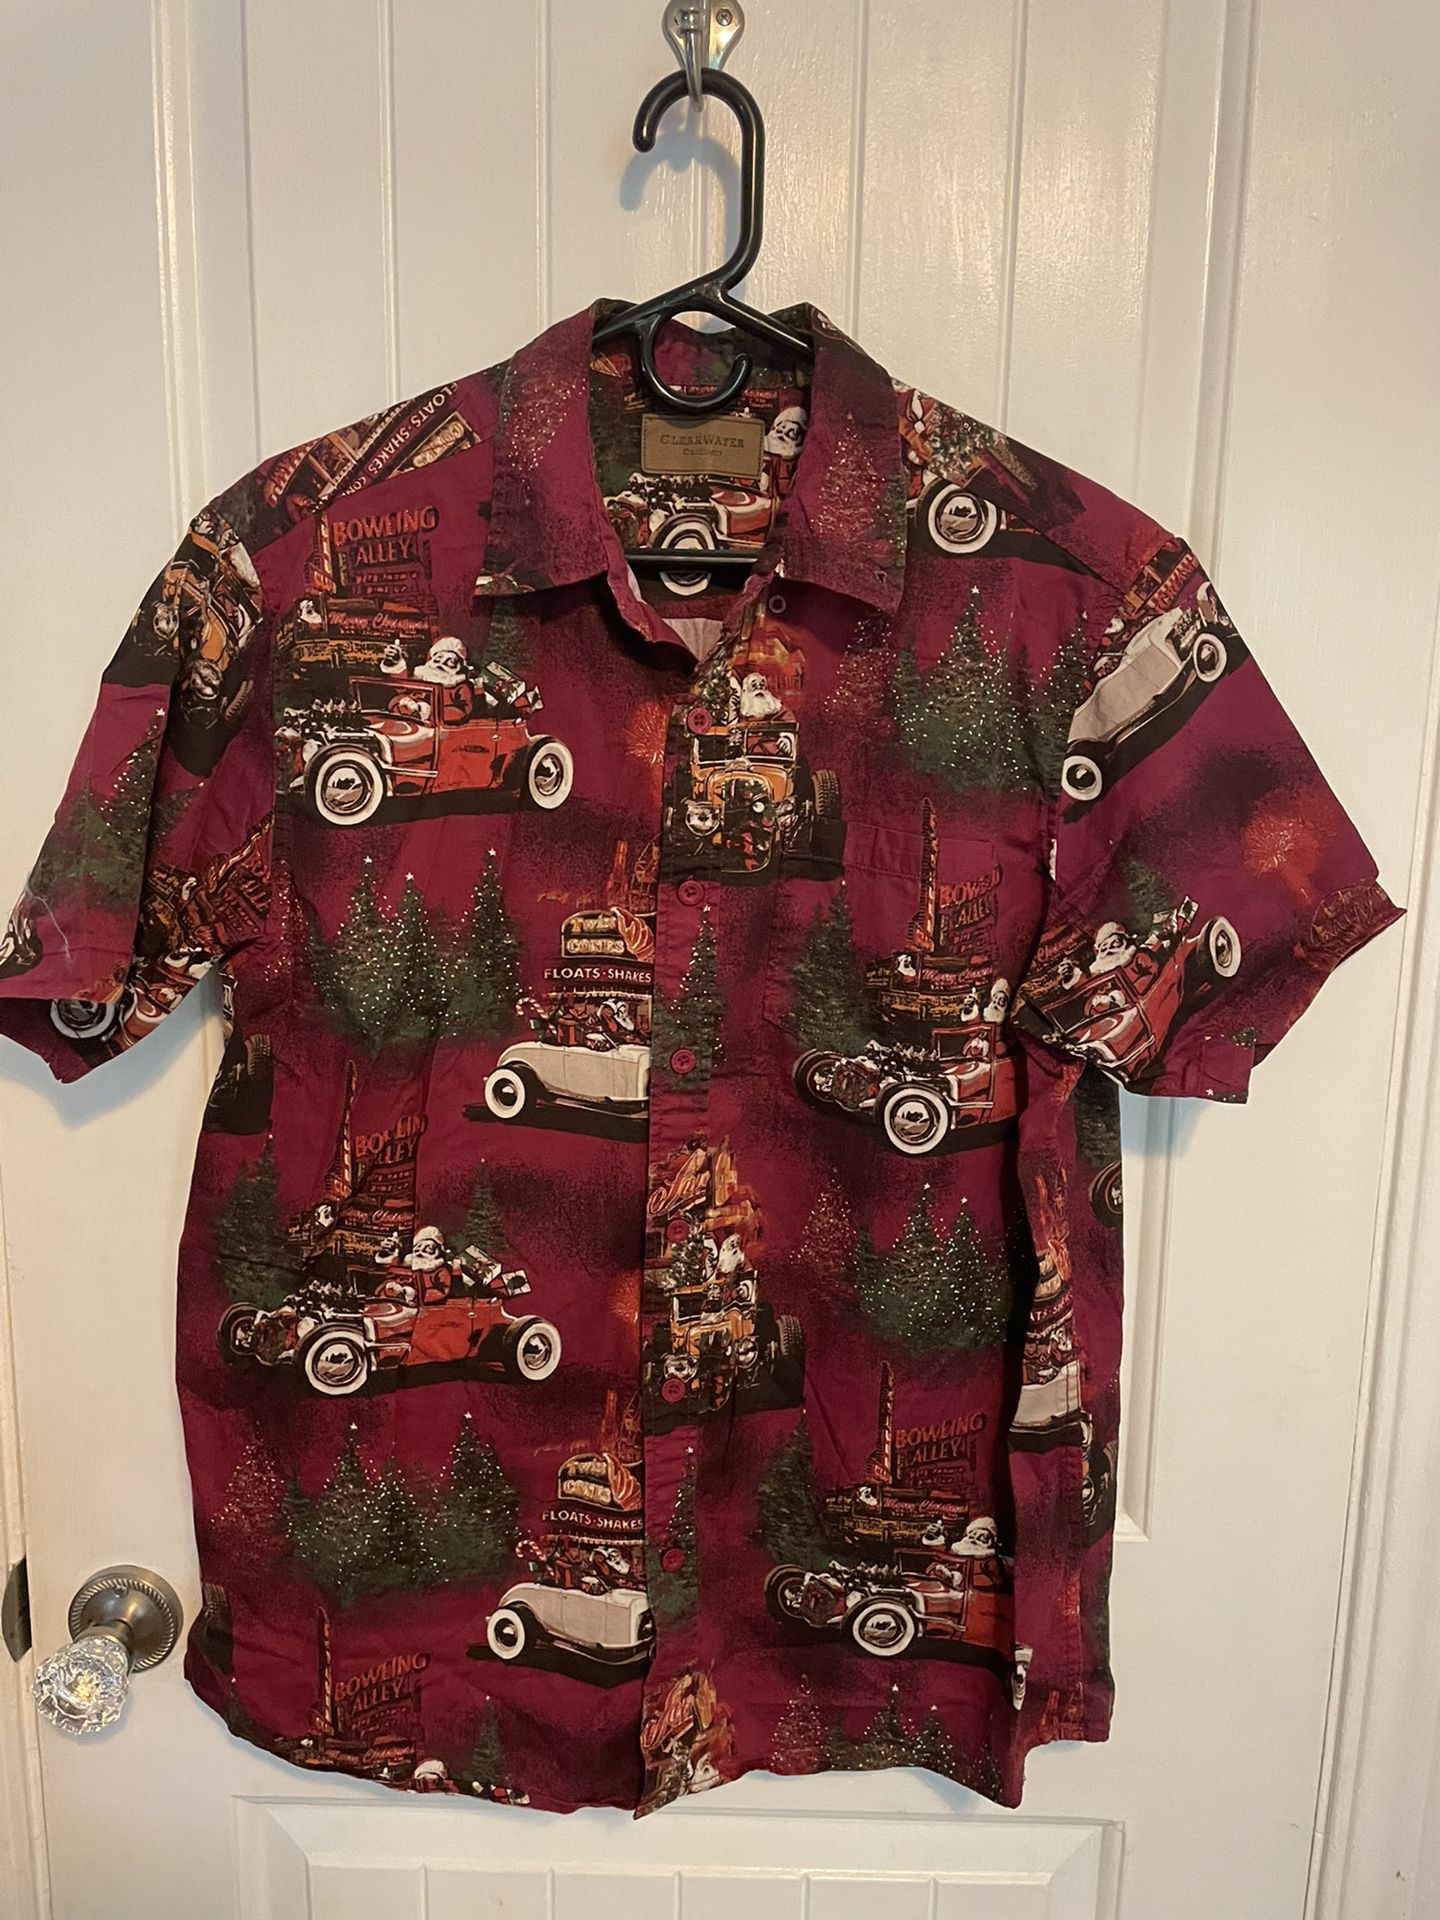  Clearwater Outfitters Santa Christmas Shirt Vintage Cars Size Large.